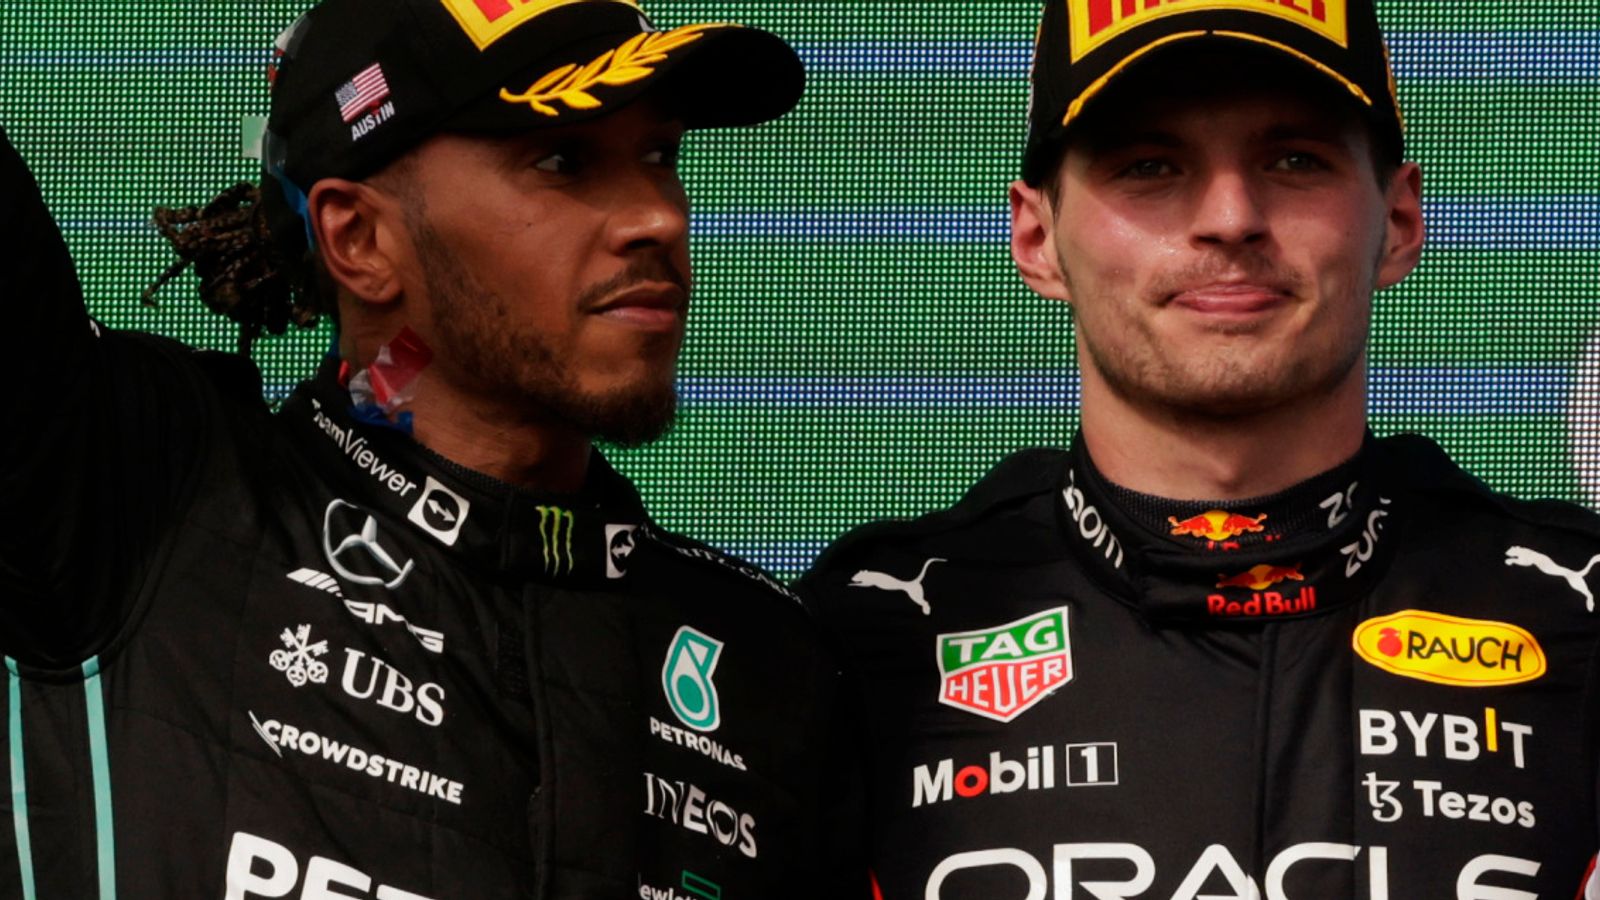 United States GP: Max Verstappen denies Lewis Hamilton first 2022 win with late overtake as Red Bull clinch constructors' title